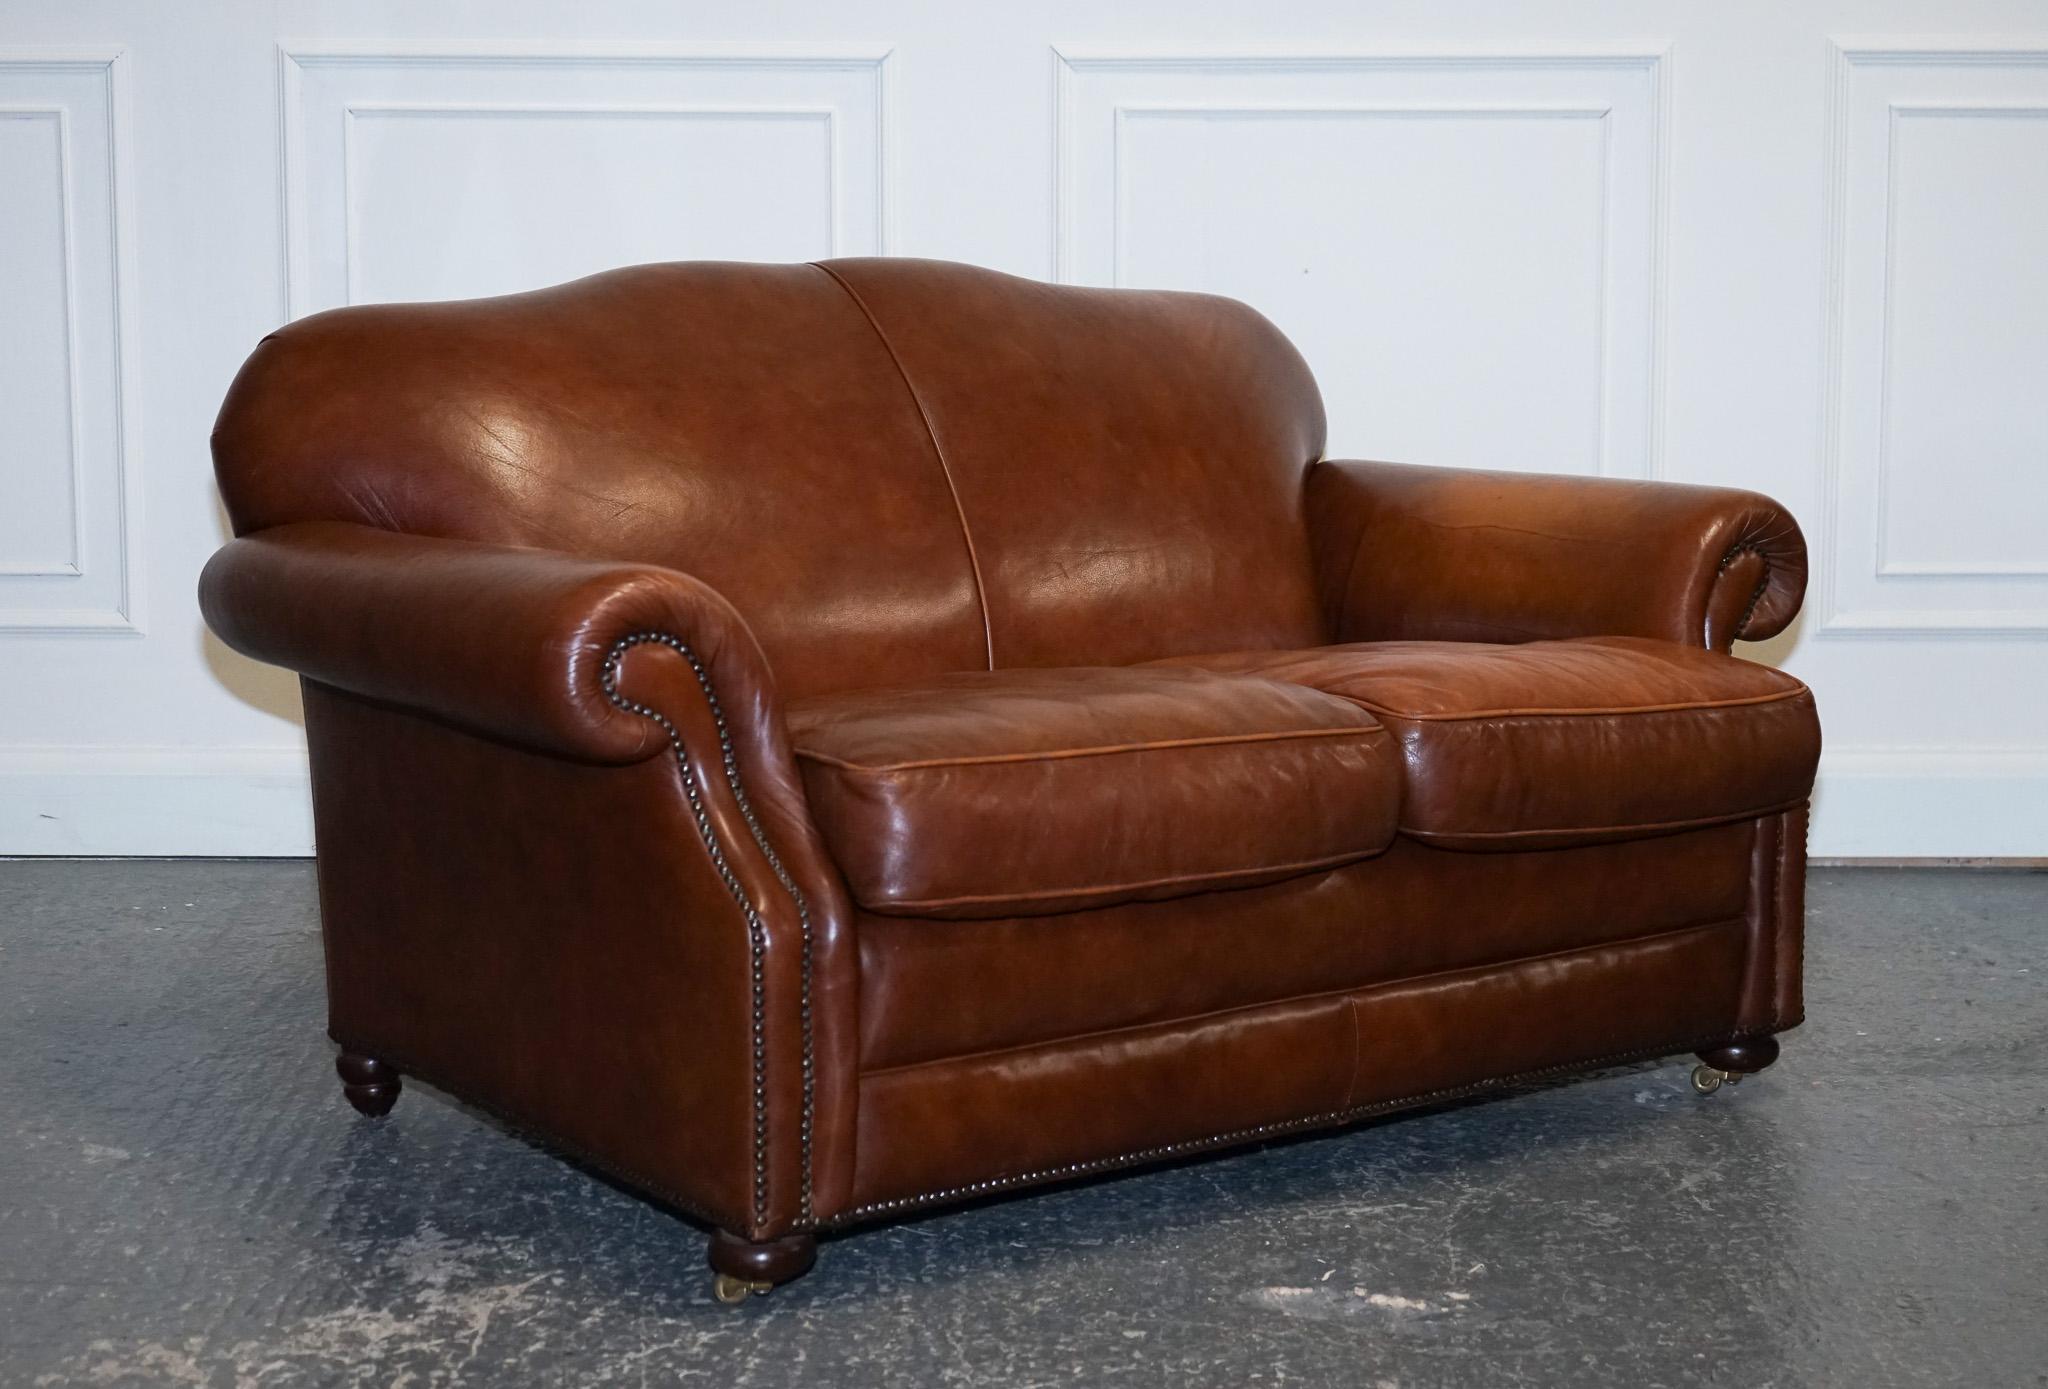 We are delighted to offer for sale this Beautiful Laura Ashley Brown Leather Hump Back Sofa.

The vintage Laura Ashley brown leather hump-back sofa with studs is a stunning statement piece that combines classic design elements with edgy detailing.